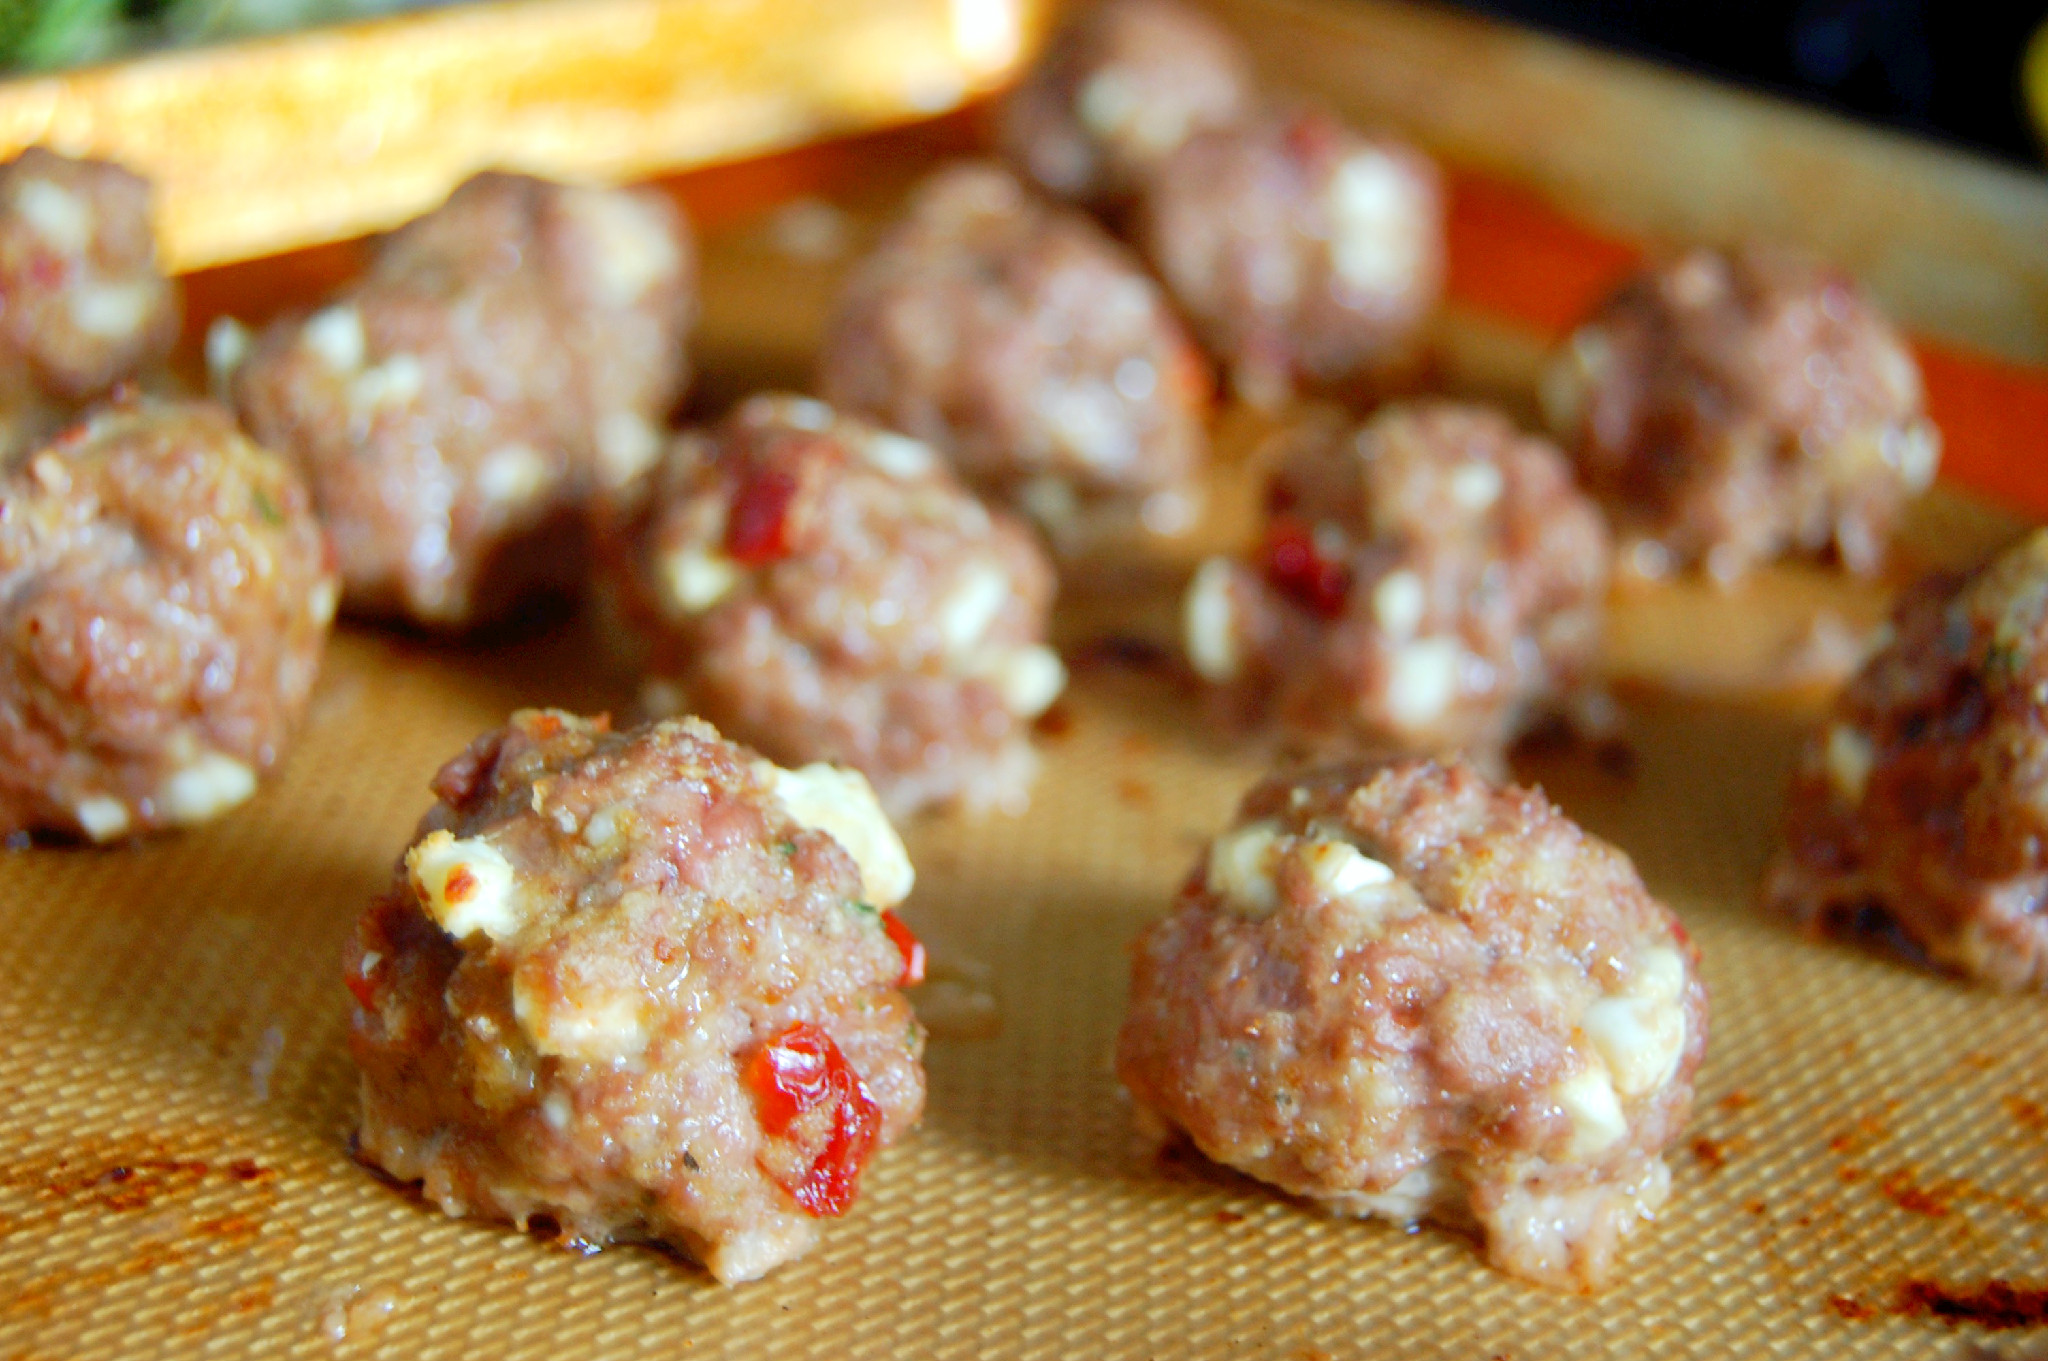 A simple lamb meatball recipe baked in the oven, studded with feta and sundried tomatoes | uprootkitchen.com